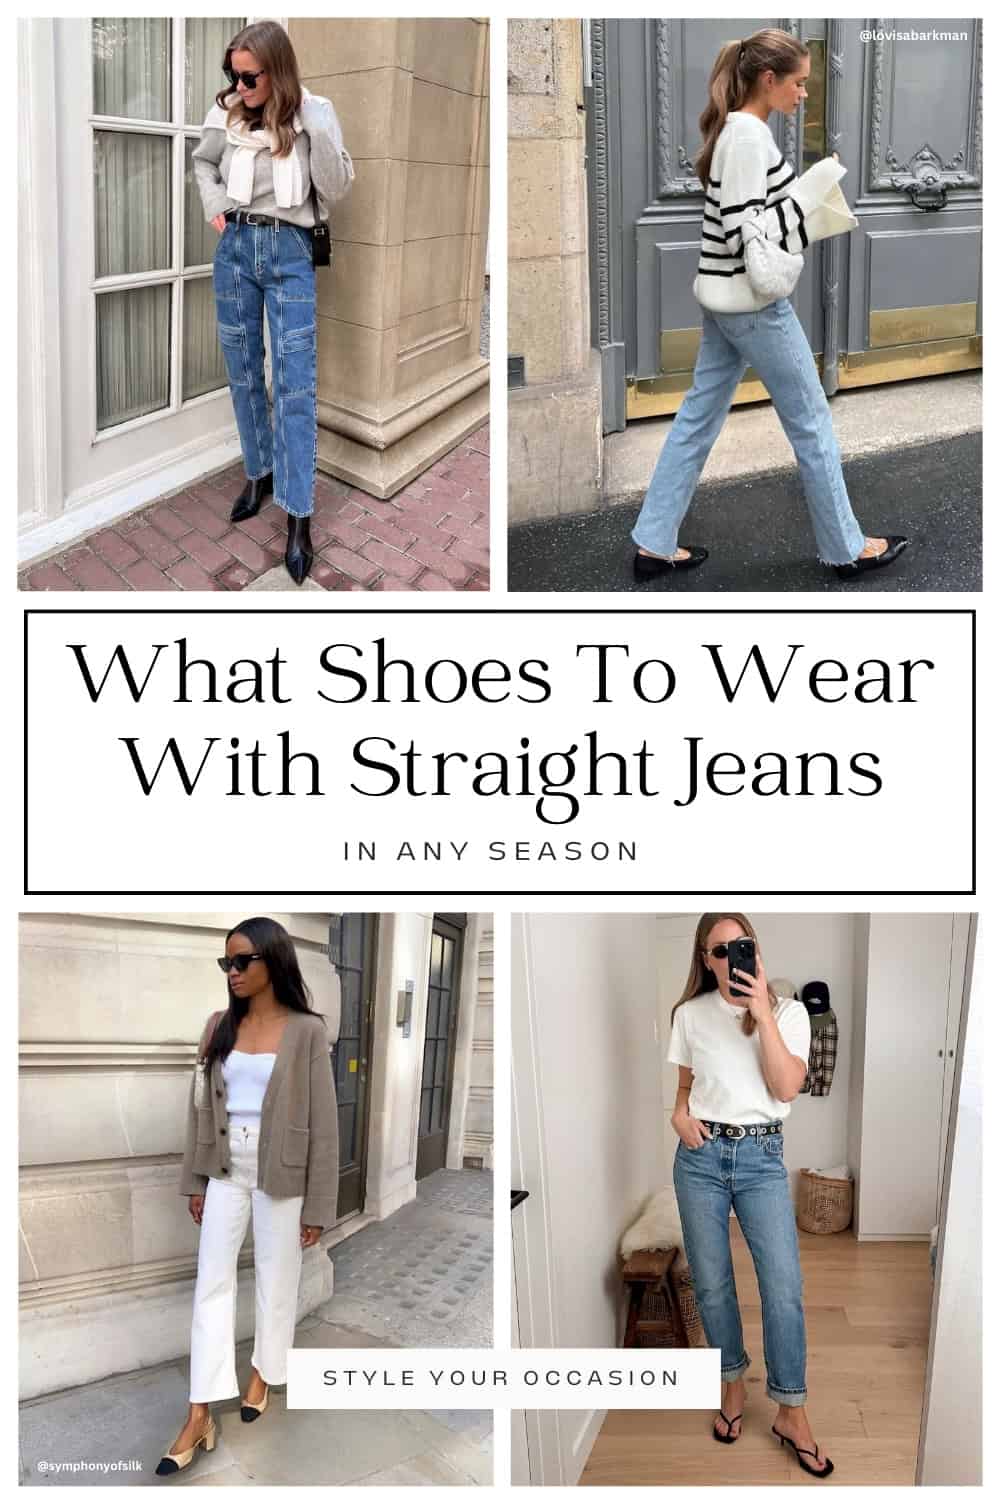 collage of four women wearing stylish outfits with different shoes and straight leg jeans